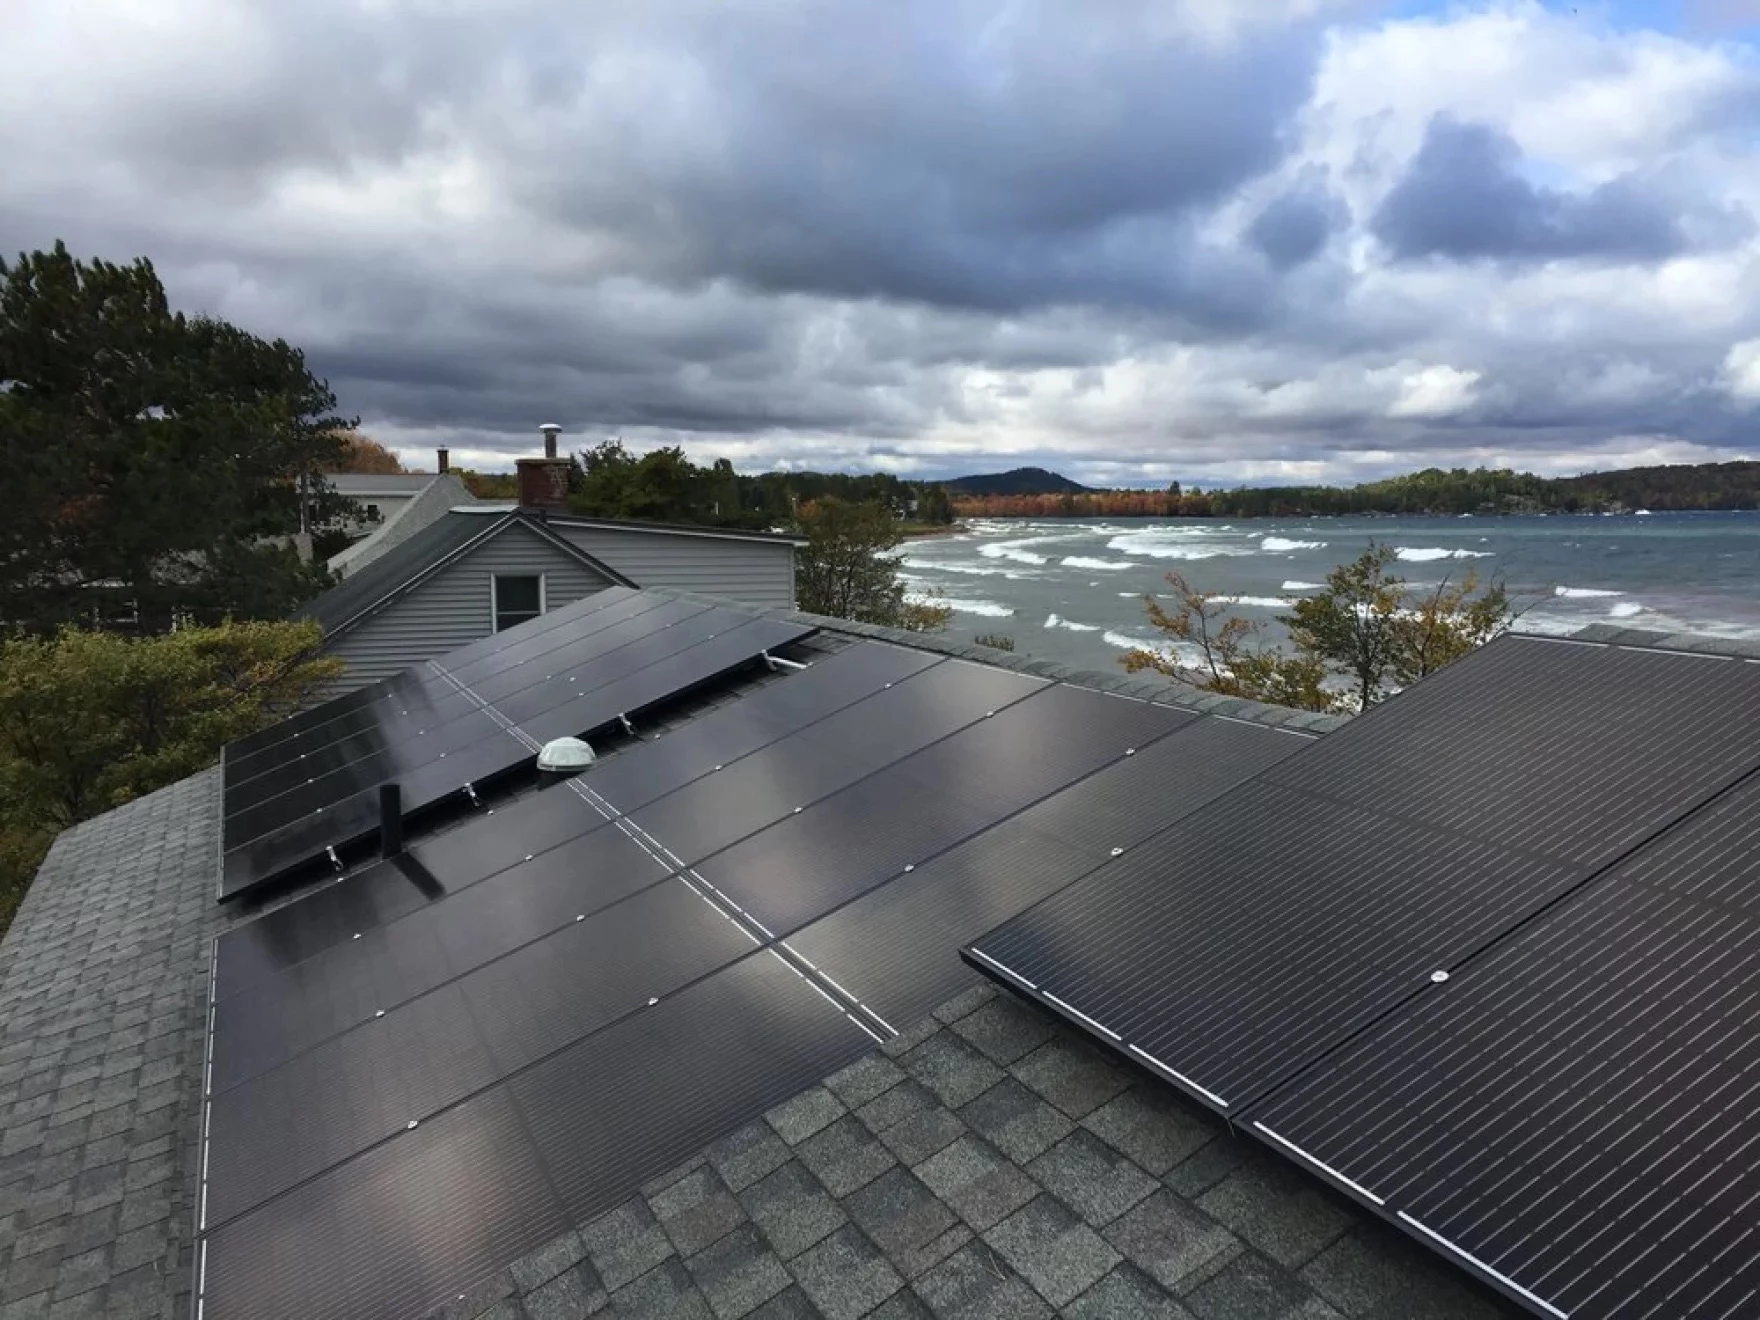 New law in Michigan requires homeowners associations to approve solar systems on rooftops